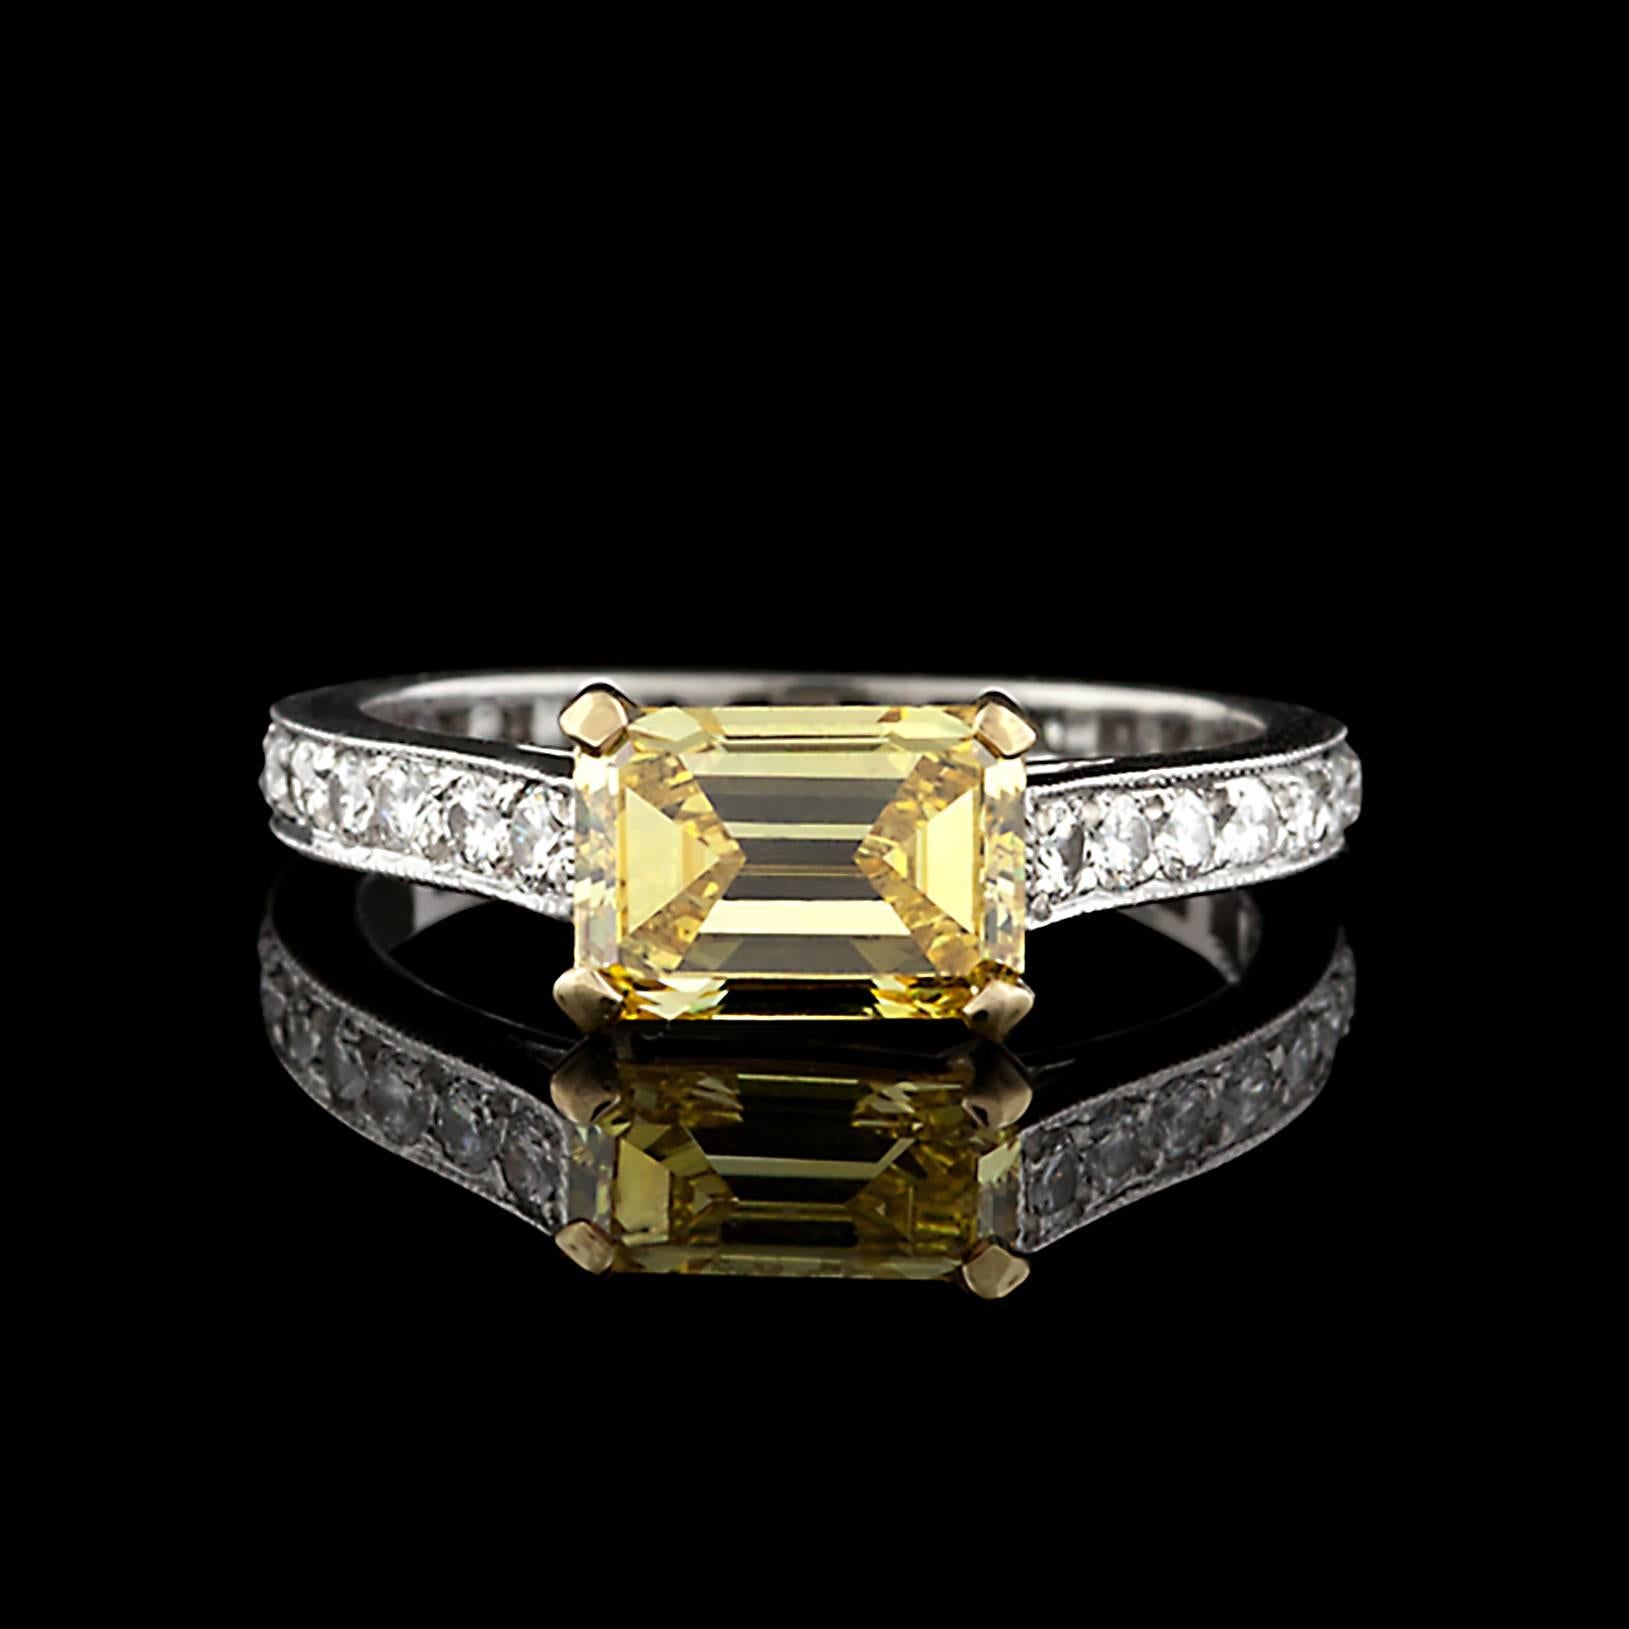 From GRAFF, creators of the "the most fabulous jewels in the world" comes this one of a kind Platinum ring featuring an exquisite 1.34 carat Fancy Vivid Yellow Diamond. This gorgeous deep yellow Emerald Cut stone is set among 28 Round